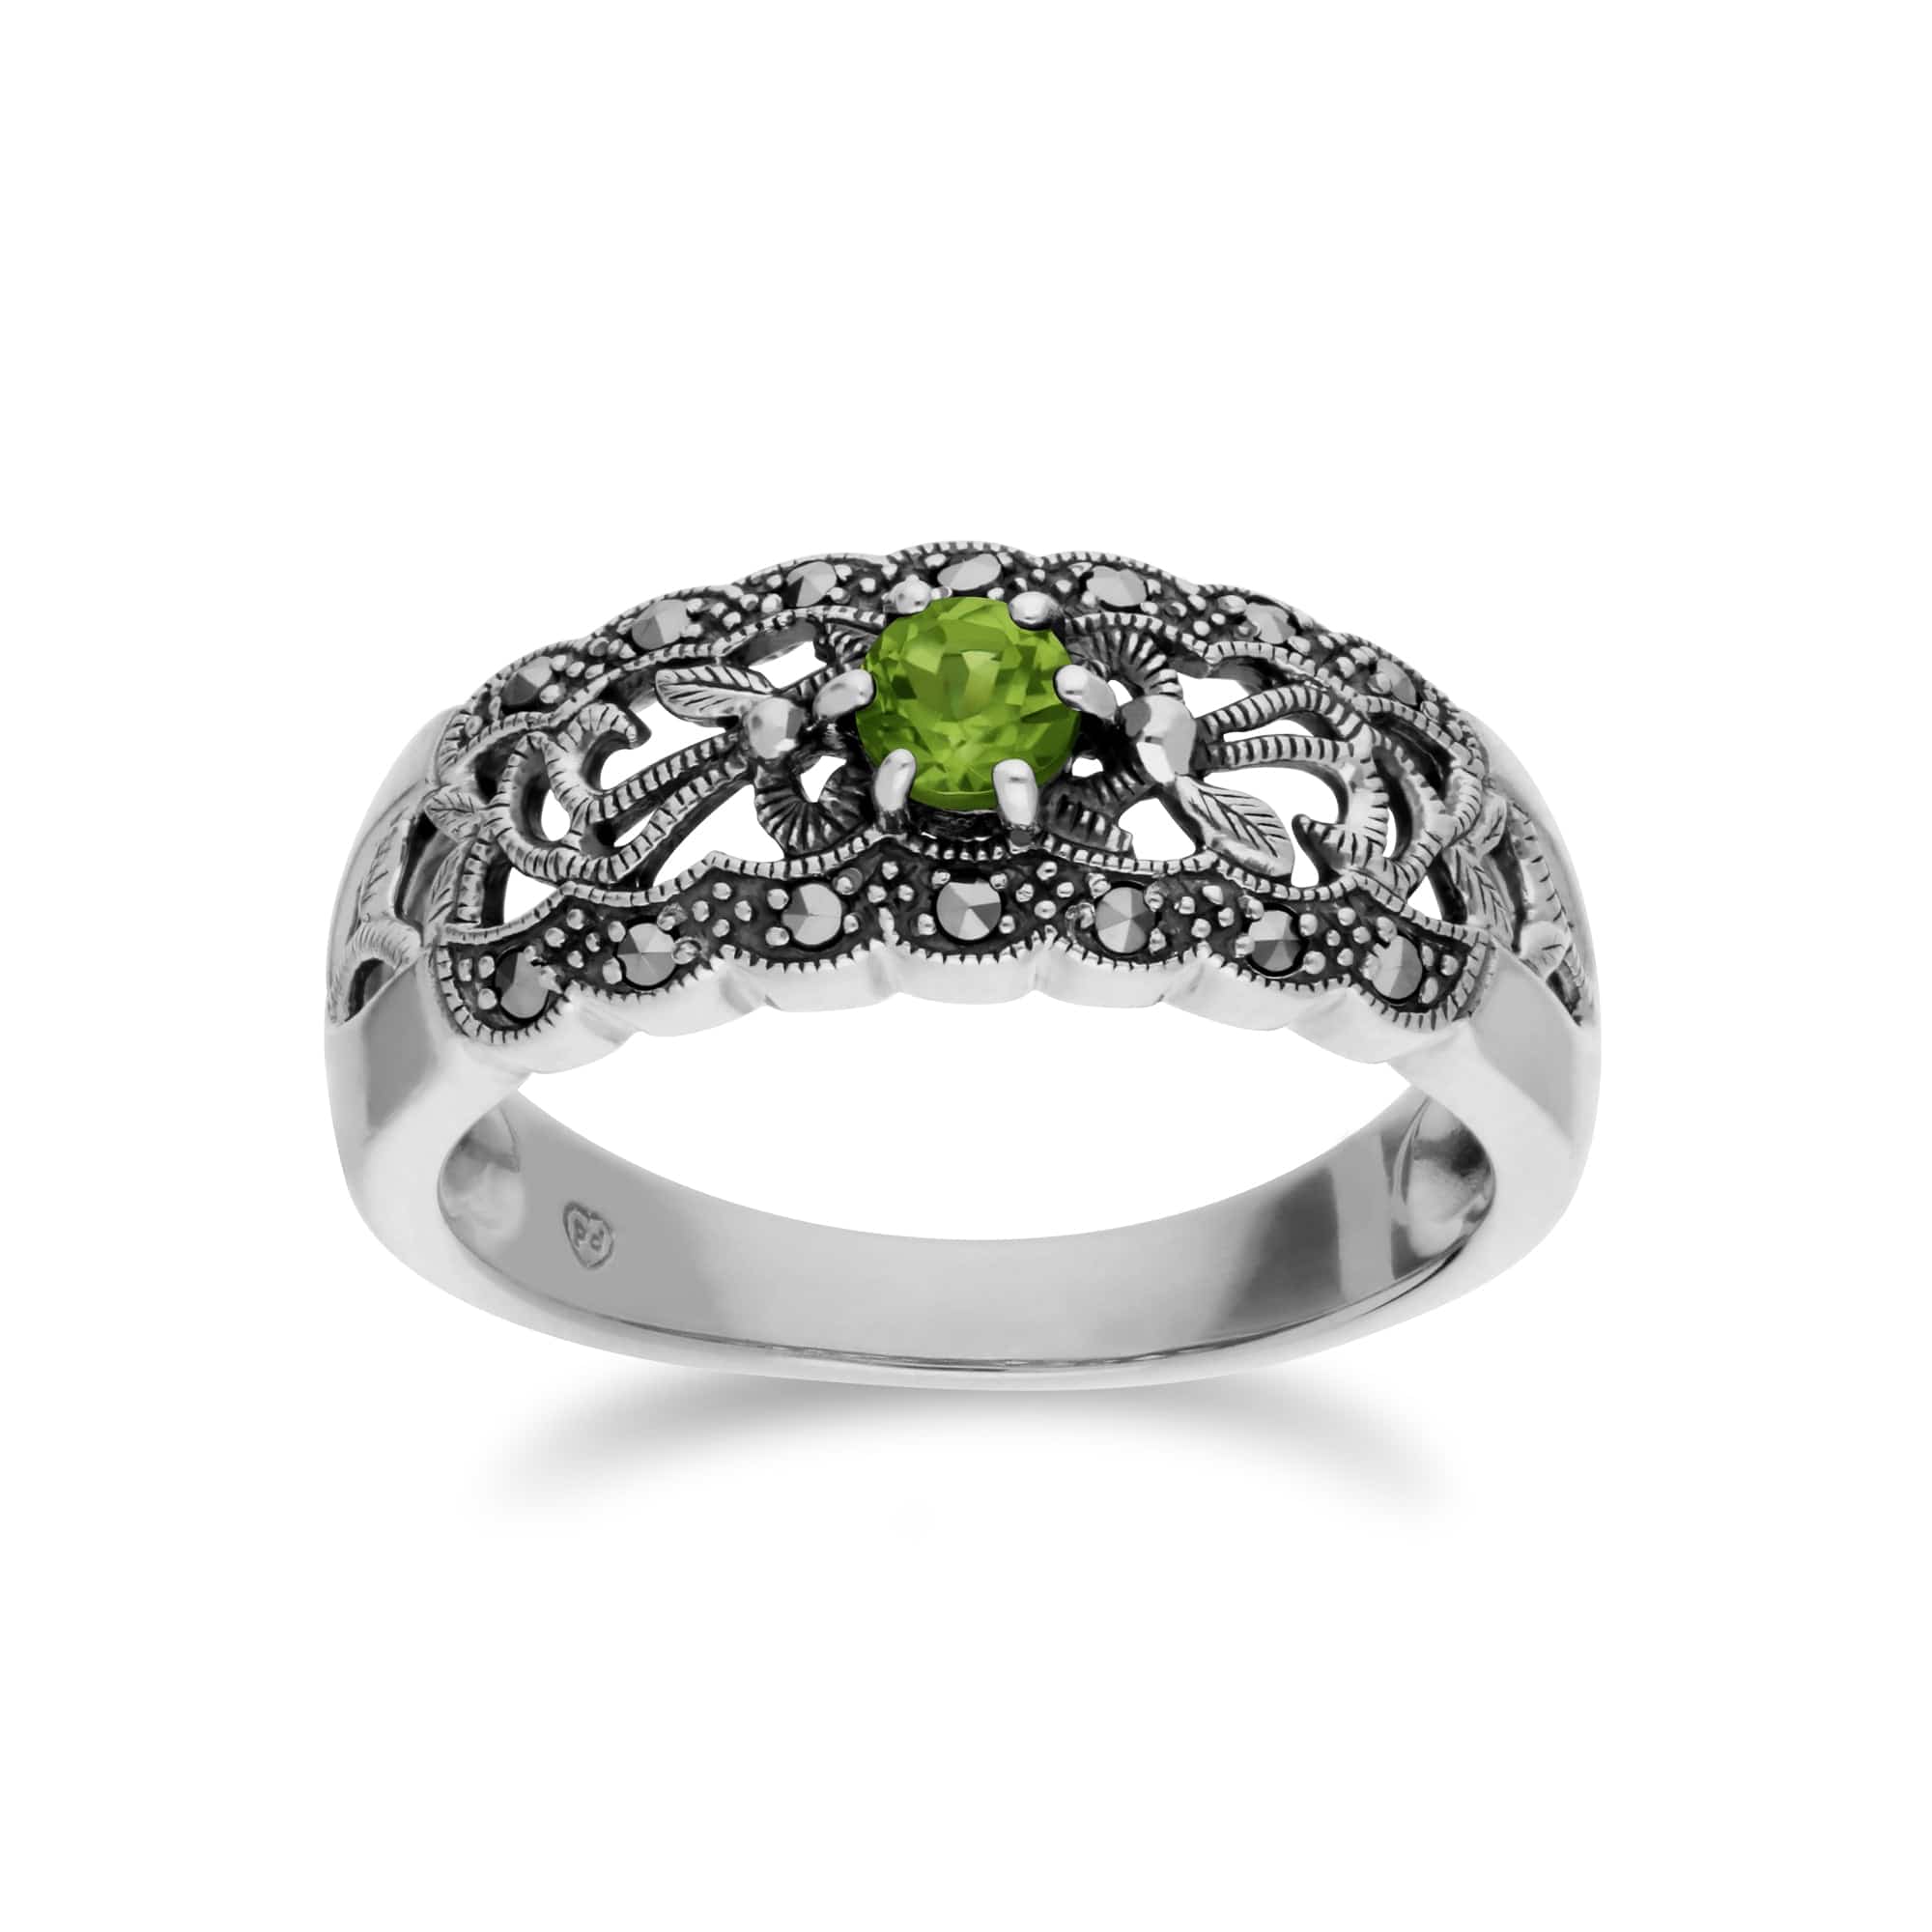 214R597703925 Art Nouveau Style Round Peridot & Marcasite Floral Band Ring in 925 Sterling Silver 1